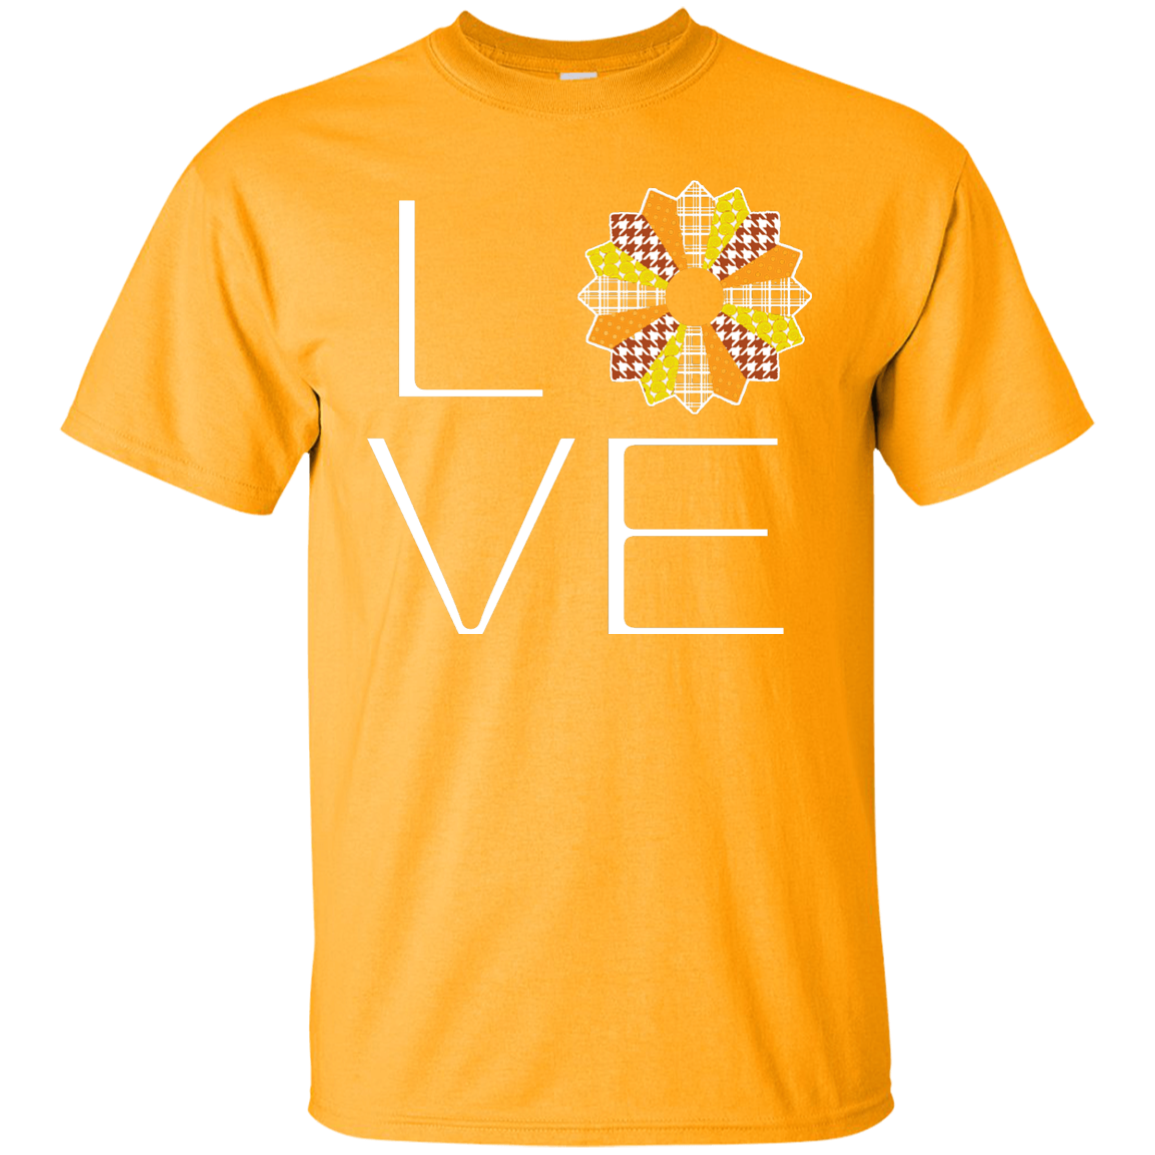 LOVE Quilting (Fall Colors) Custom Ultra Cotton T-Shirt - Crafter4Life - 9